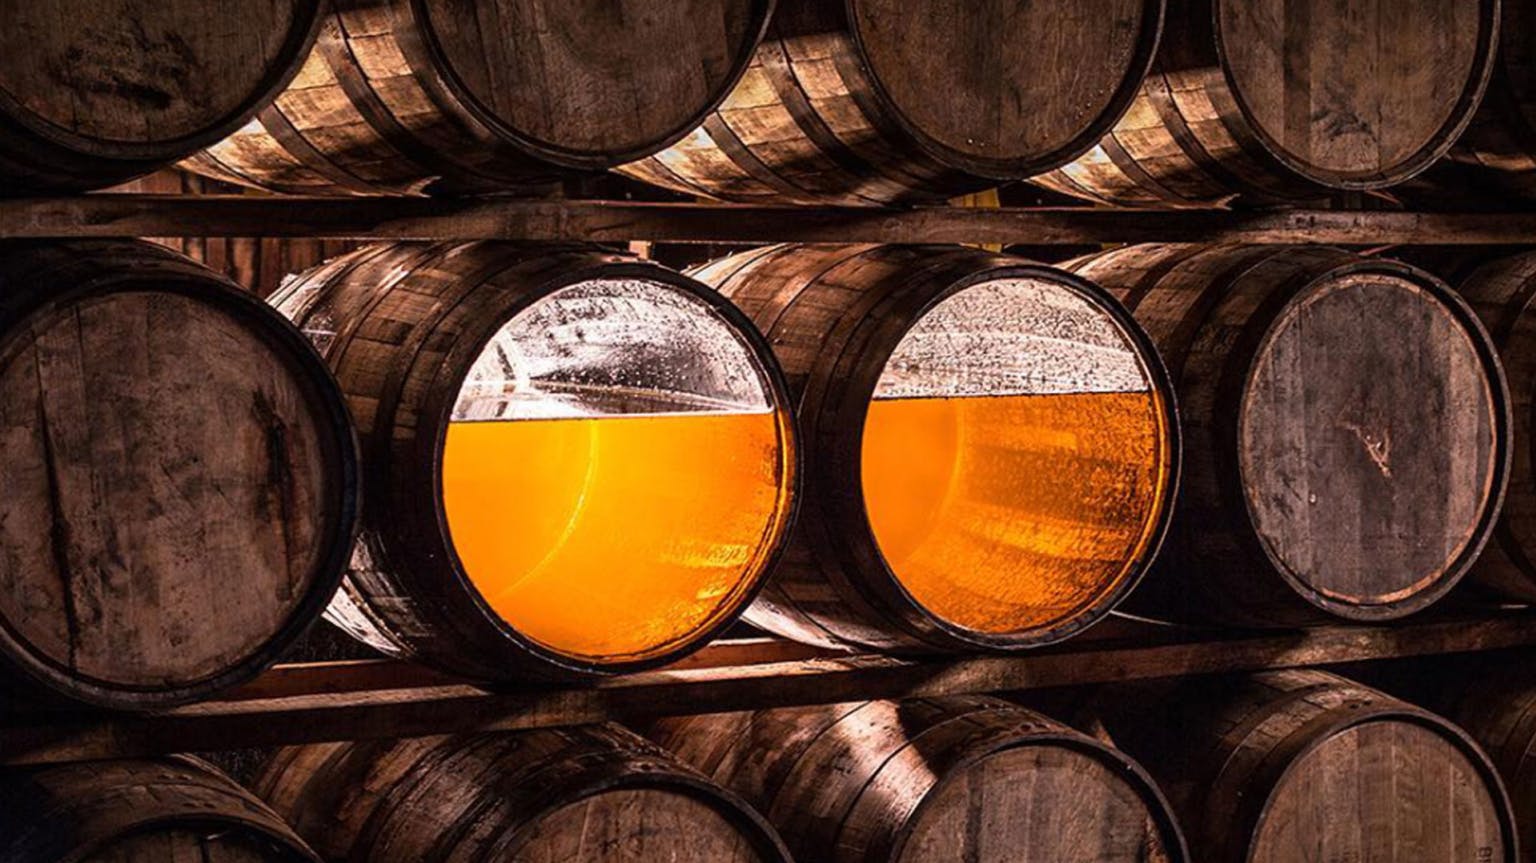 What is cask finishing?